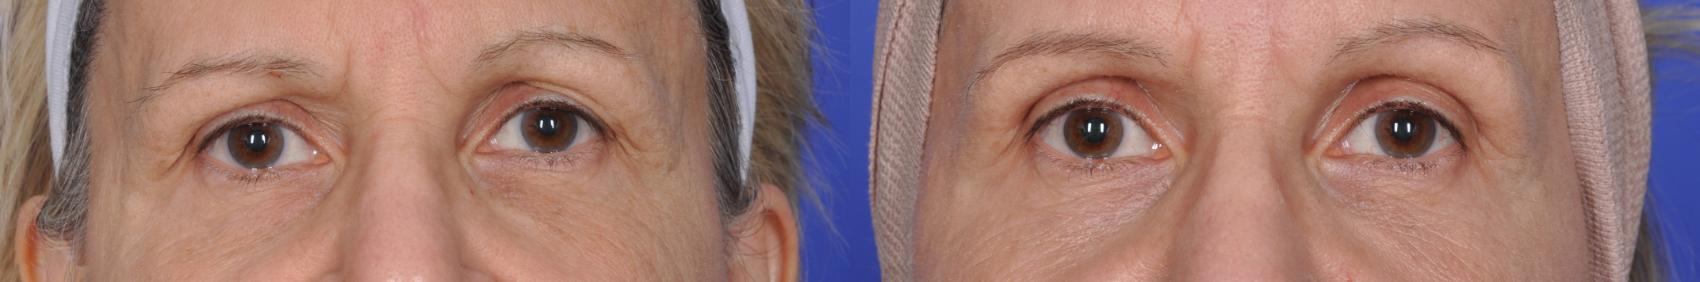 This photo shows before and after of ThermiSmooth eyes treatment where fine lines and deep folds around the eyes are noticeability smoother.